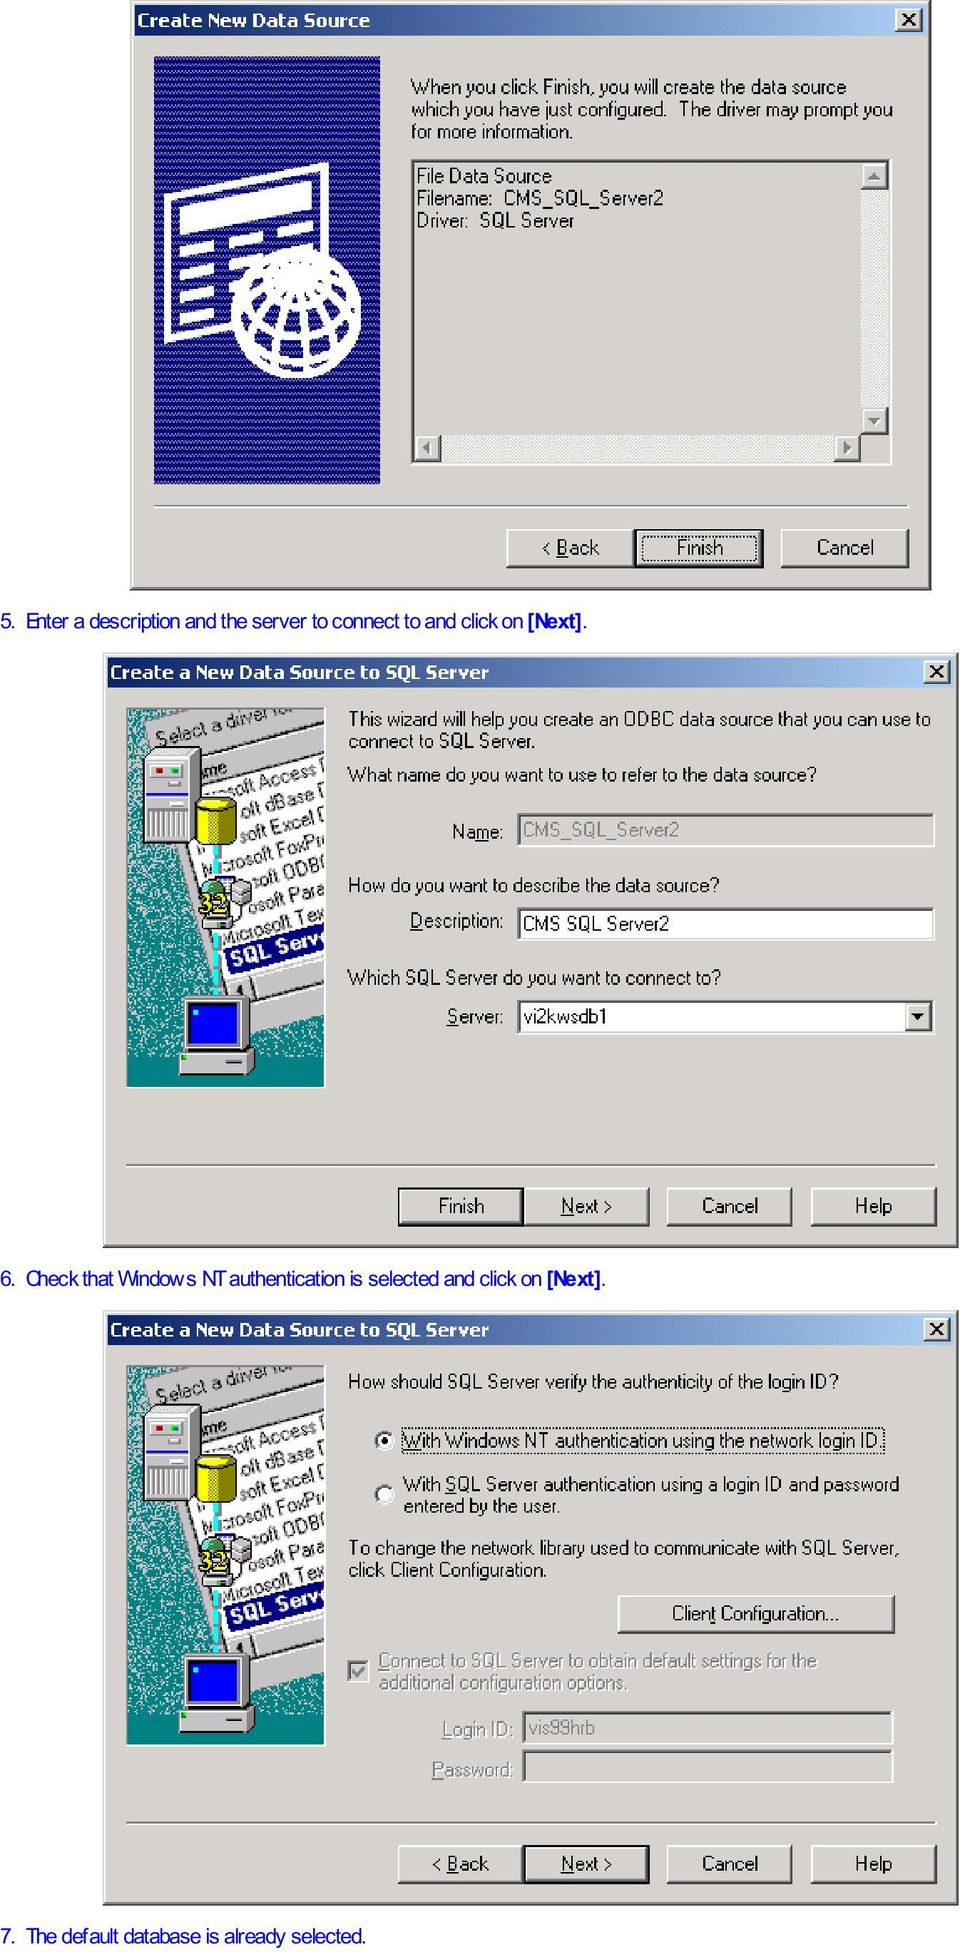 Check that Windows NT authentication is